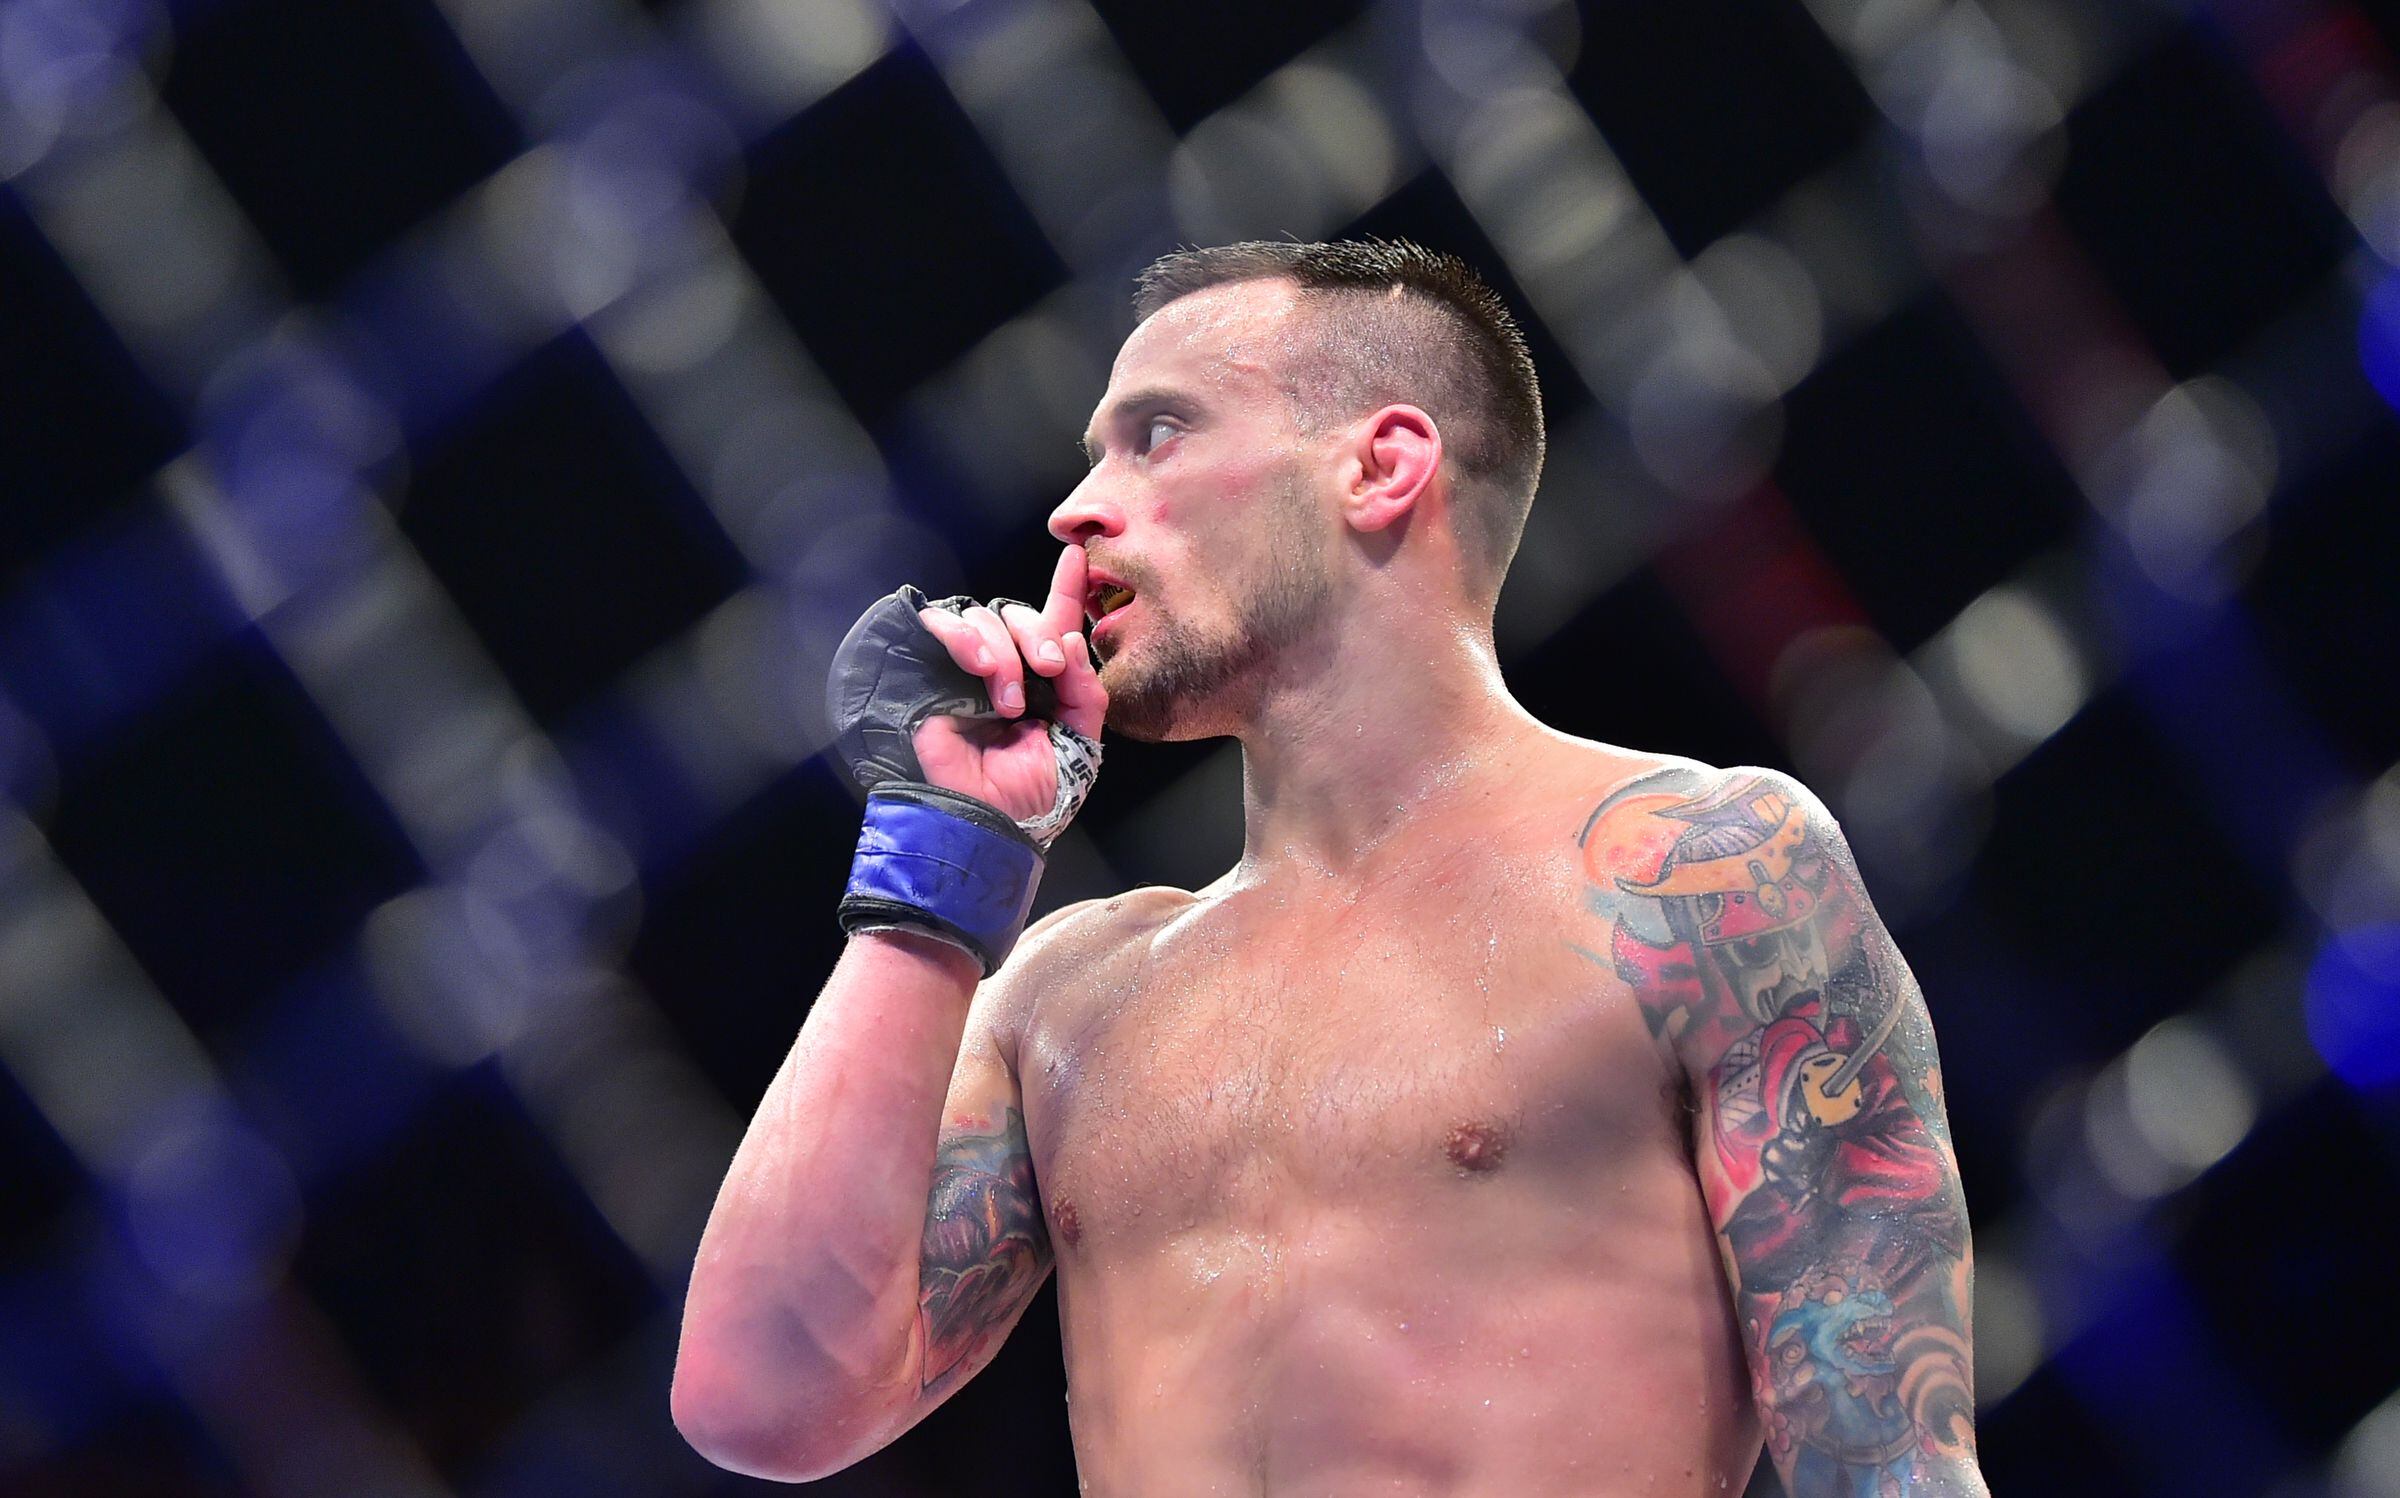 UFC betting scandal: What did James Krause do? A timeline of events